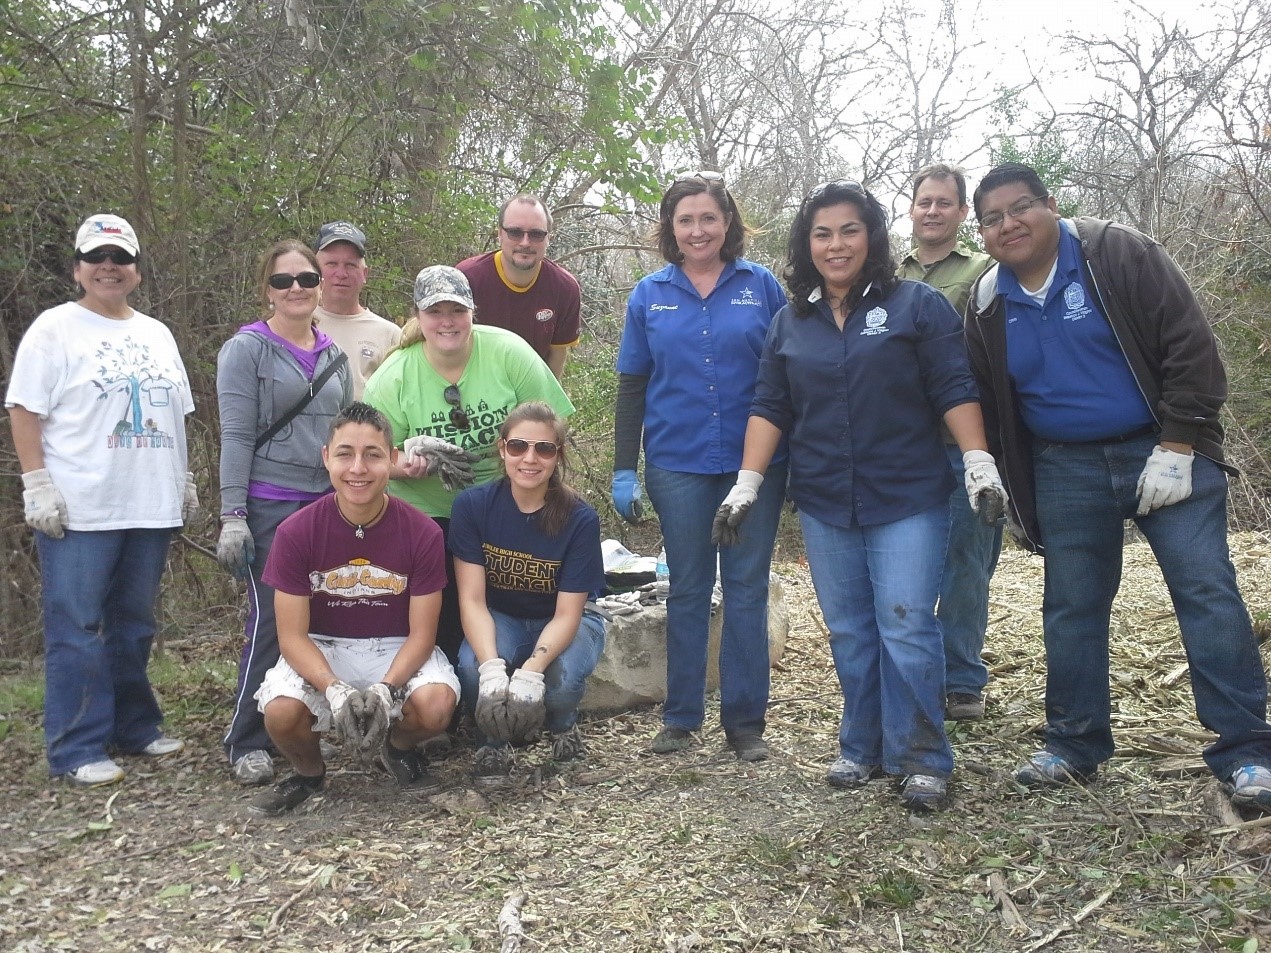 Volunteering with River Authority staff, River Warriors and District 3 Councilwoman Rebecca Viagran’s office at the annual Basura Bash River and Waterway Cleanup event. 